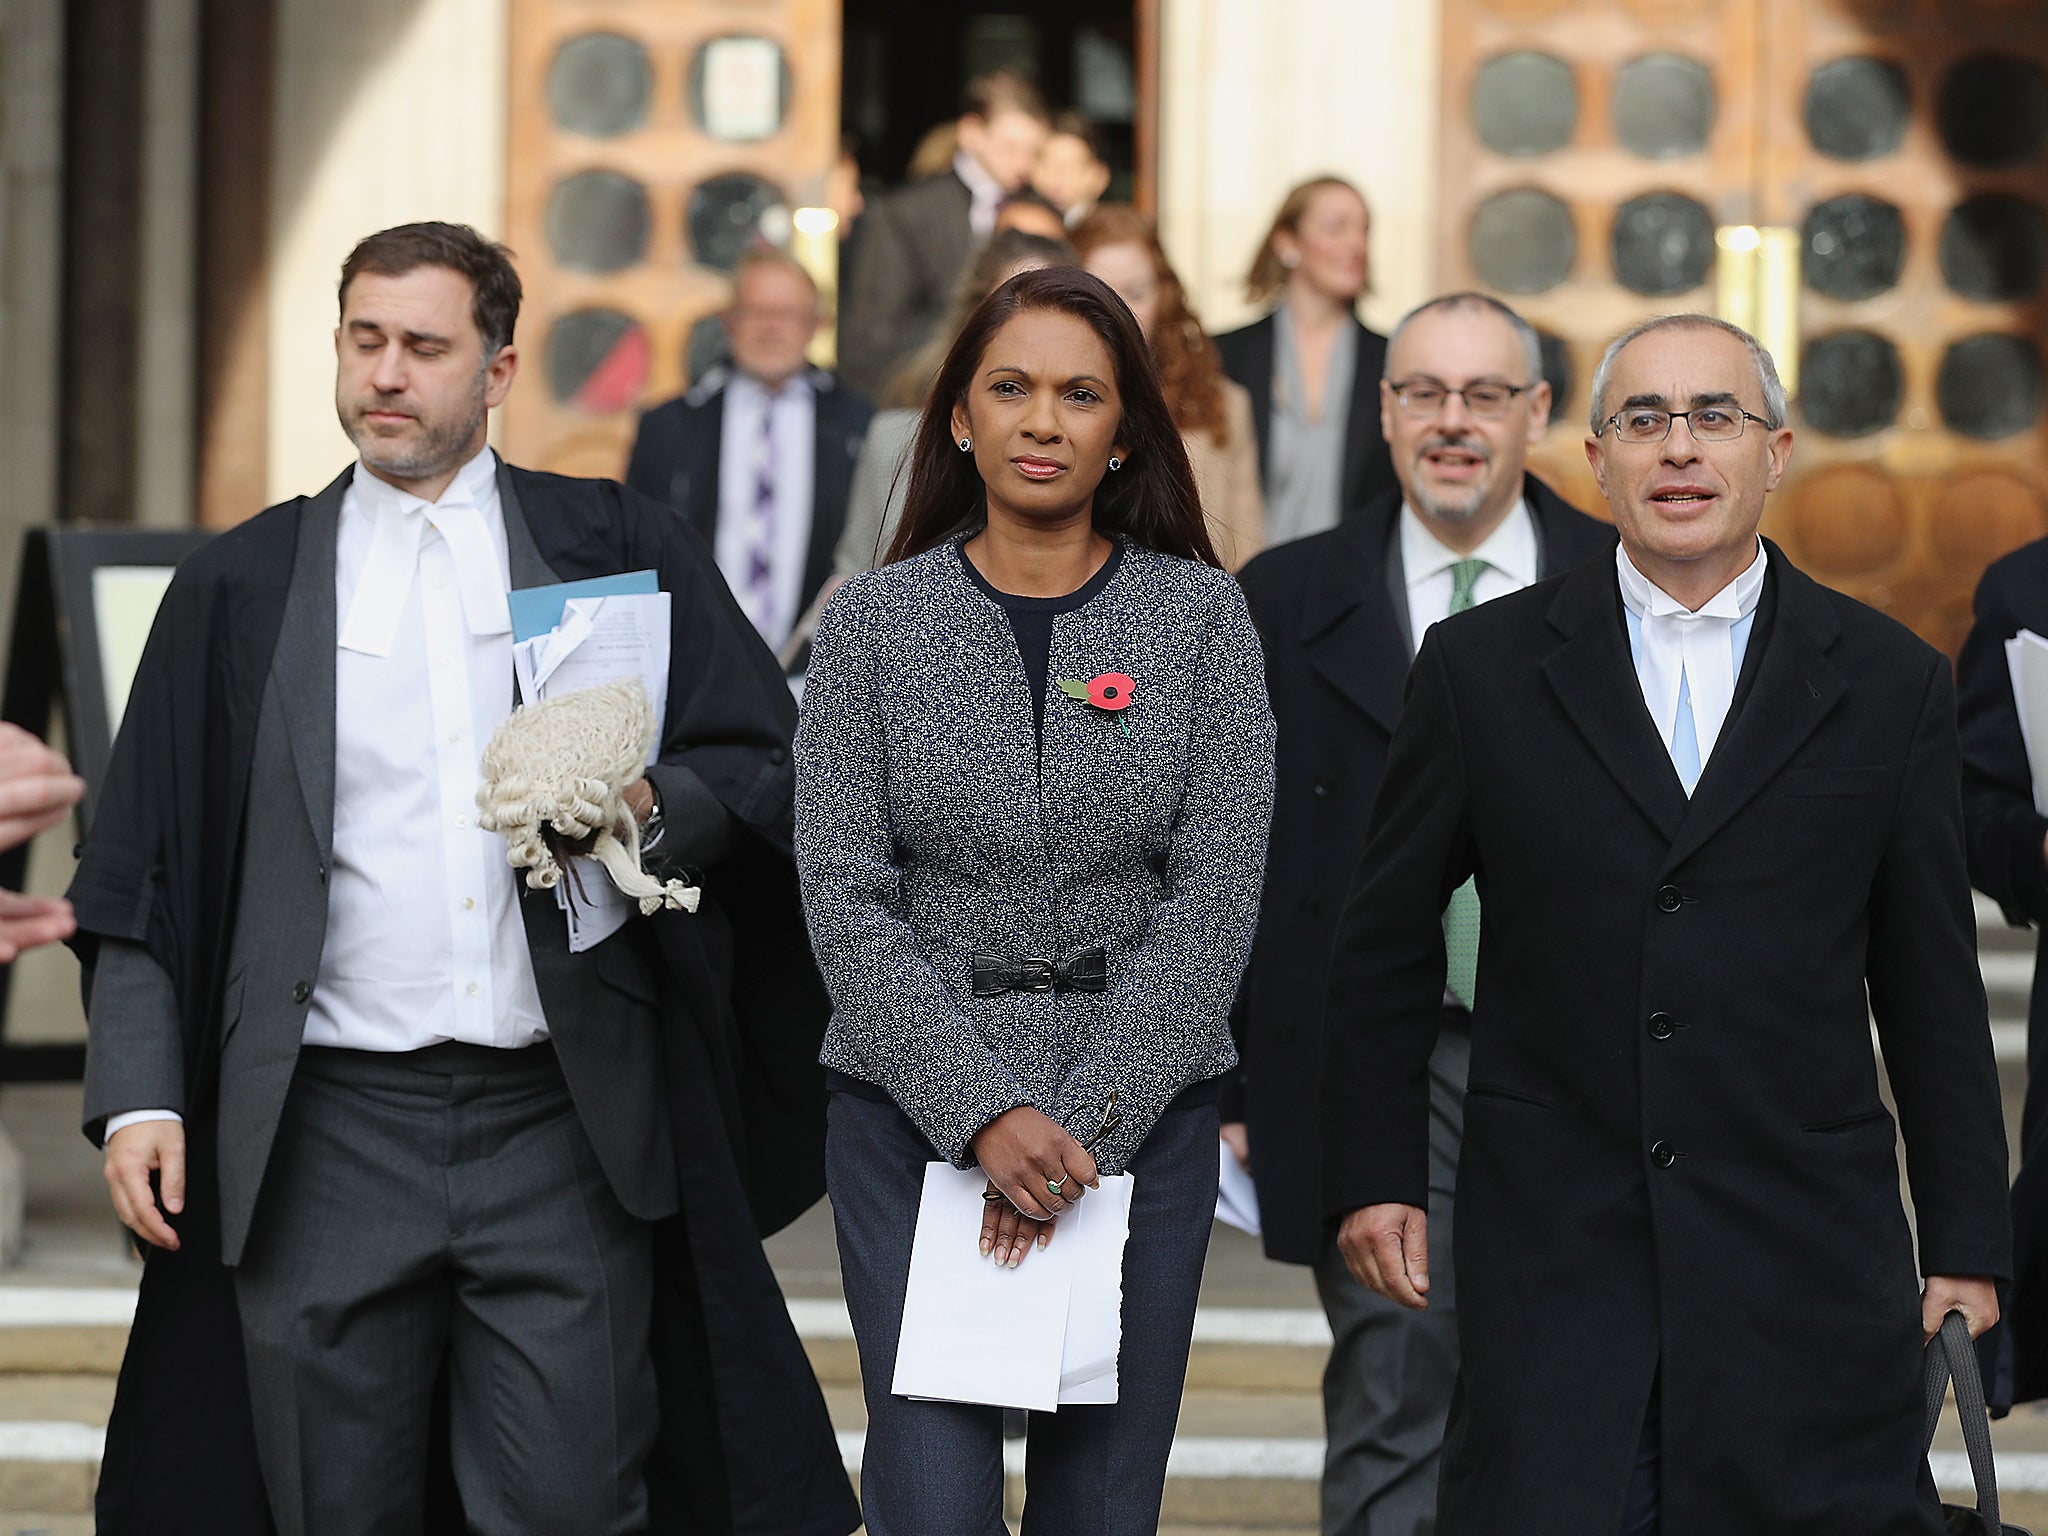 Gina Miller’s Brexit challenge has sent betting markets into a spin